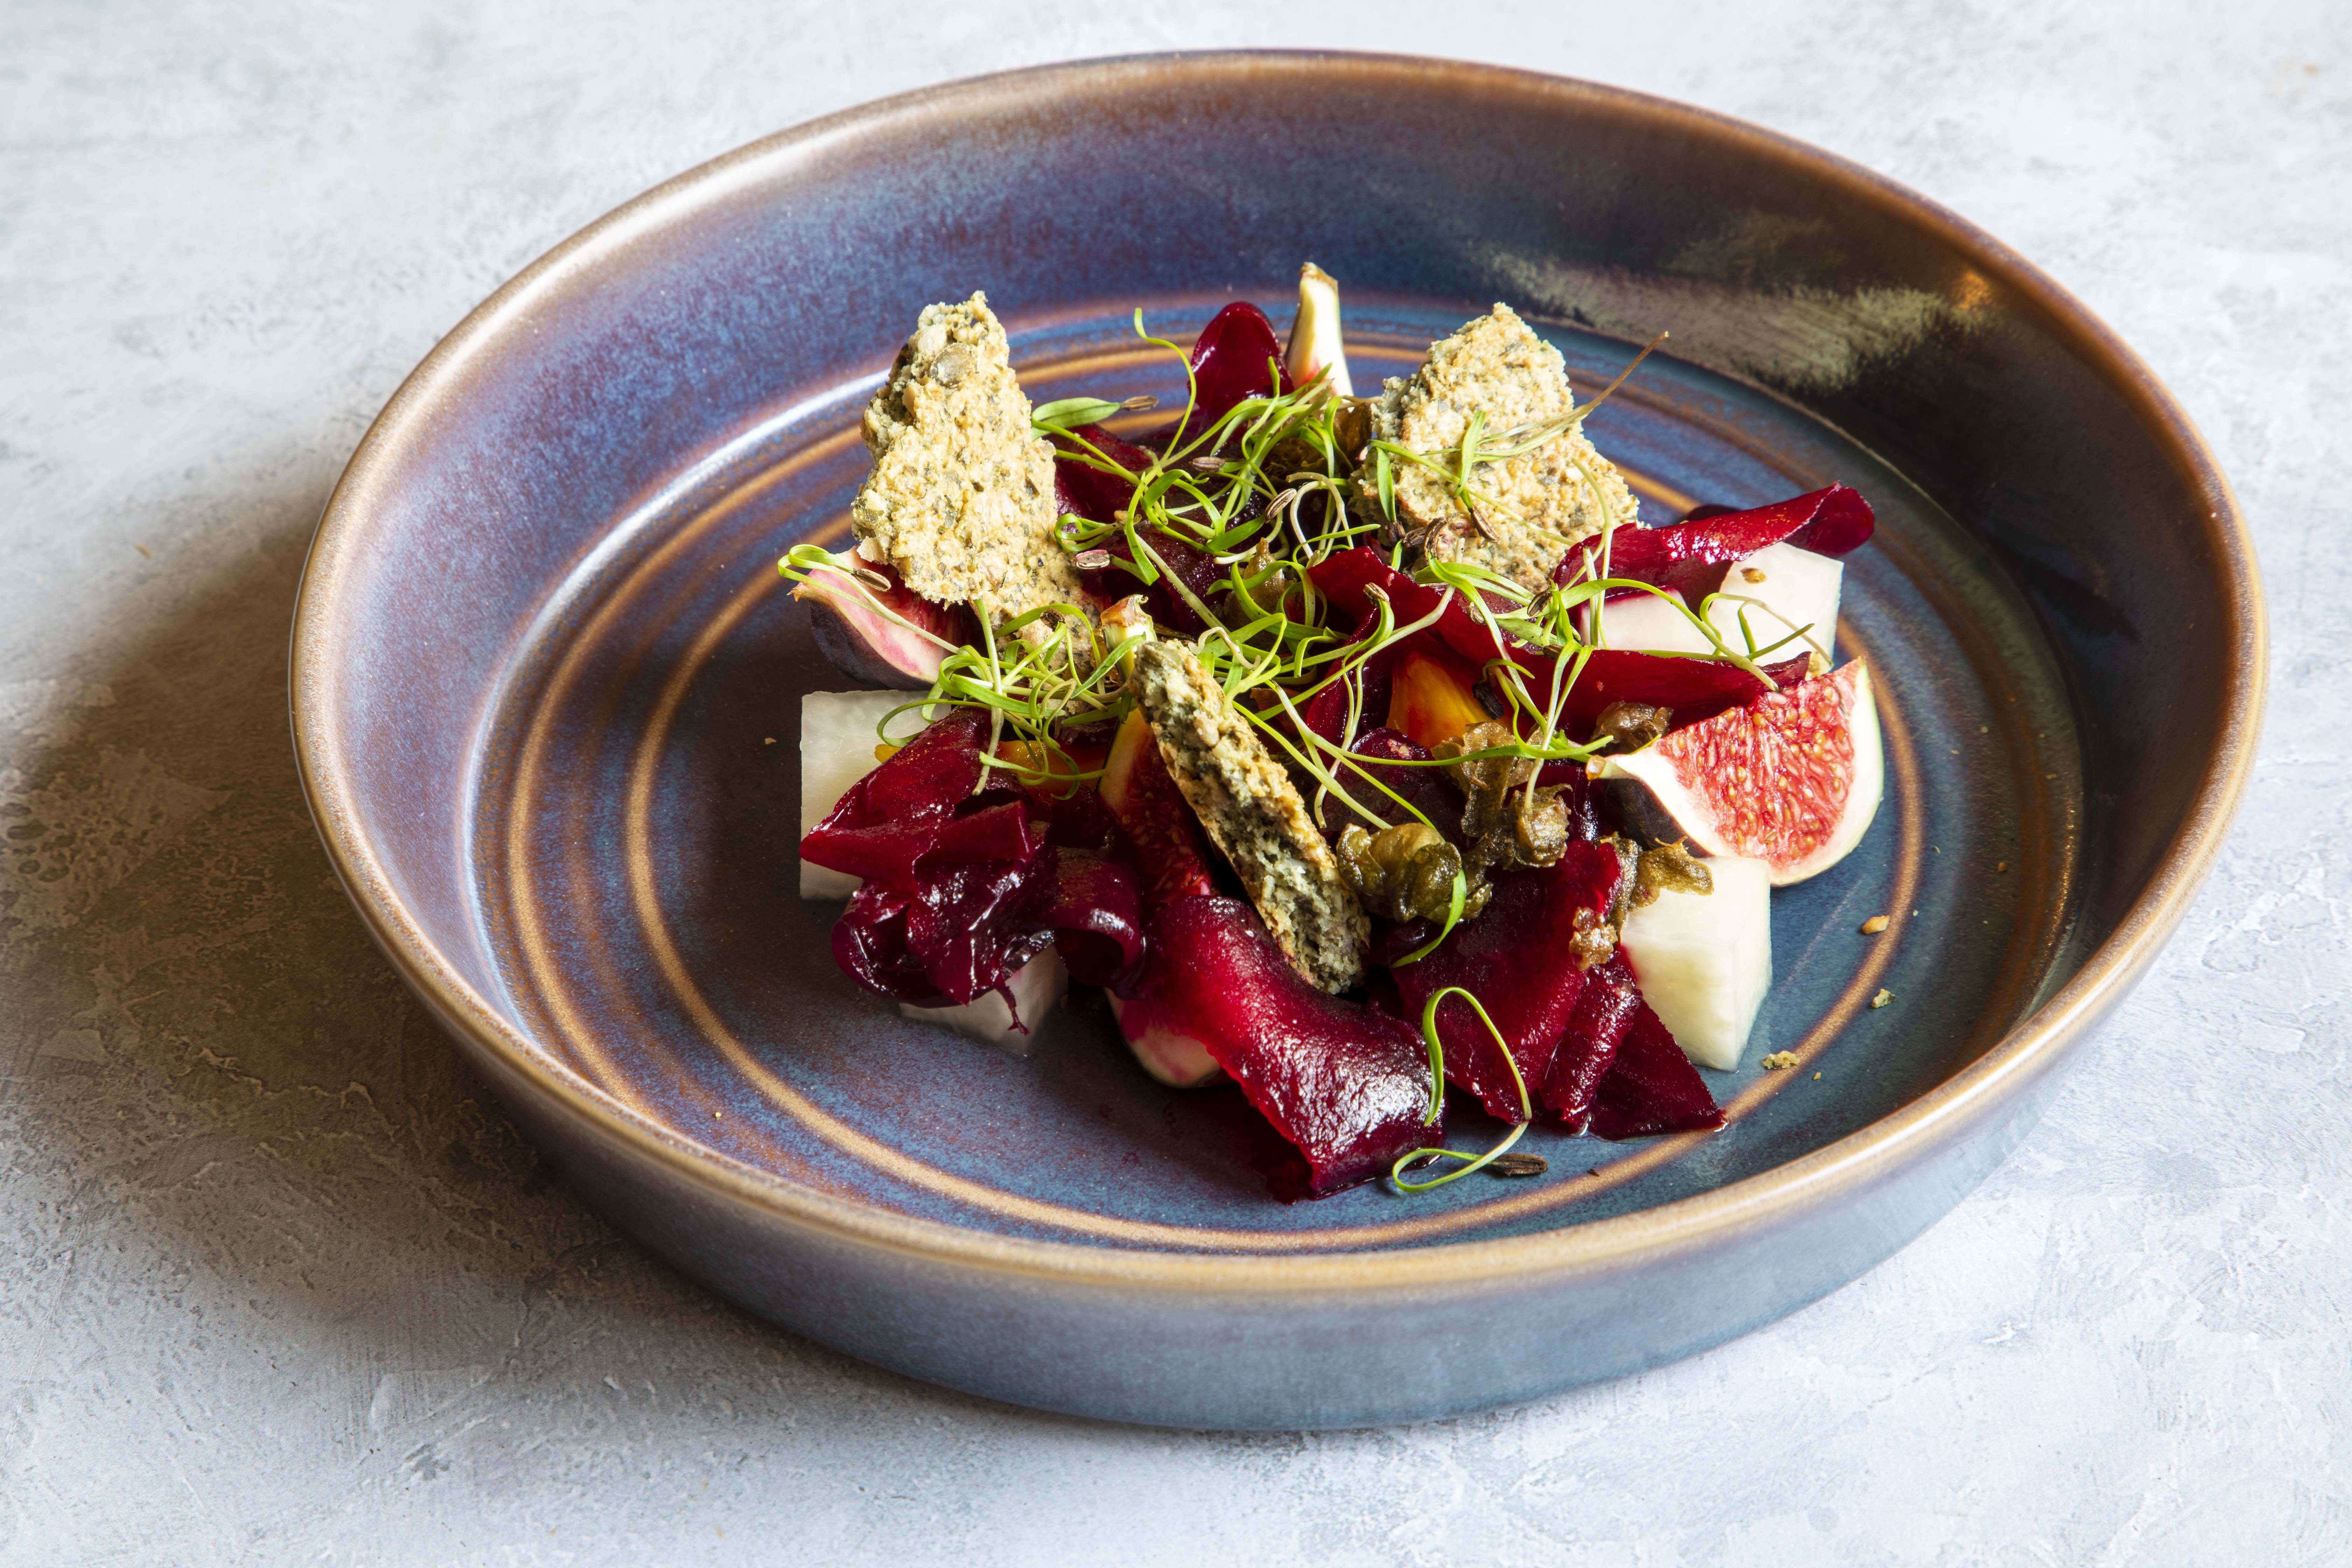 Beetroot with citrus, fig, kohlrabi and seed cracker.